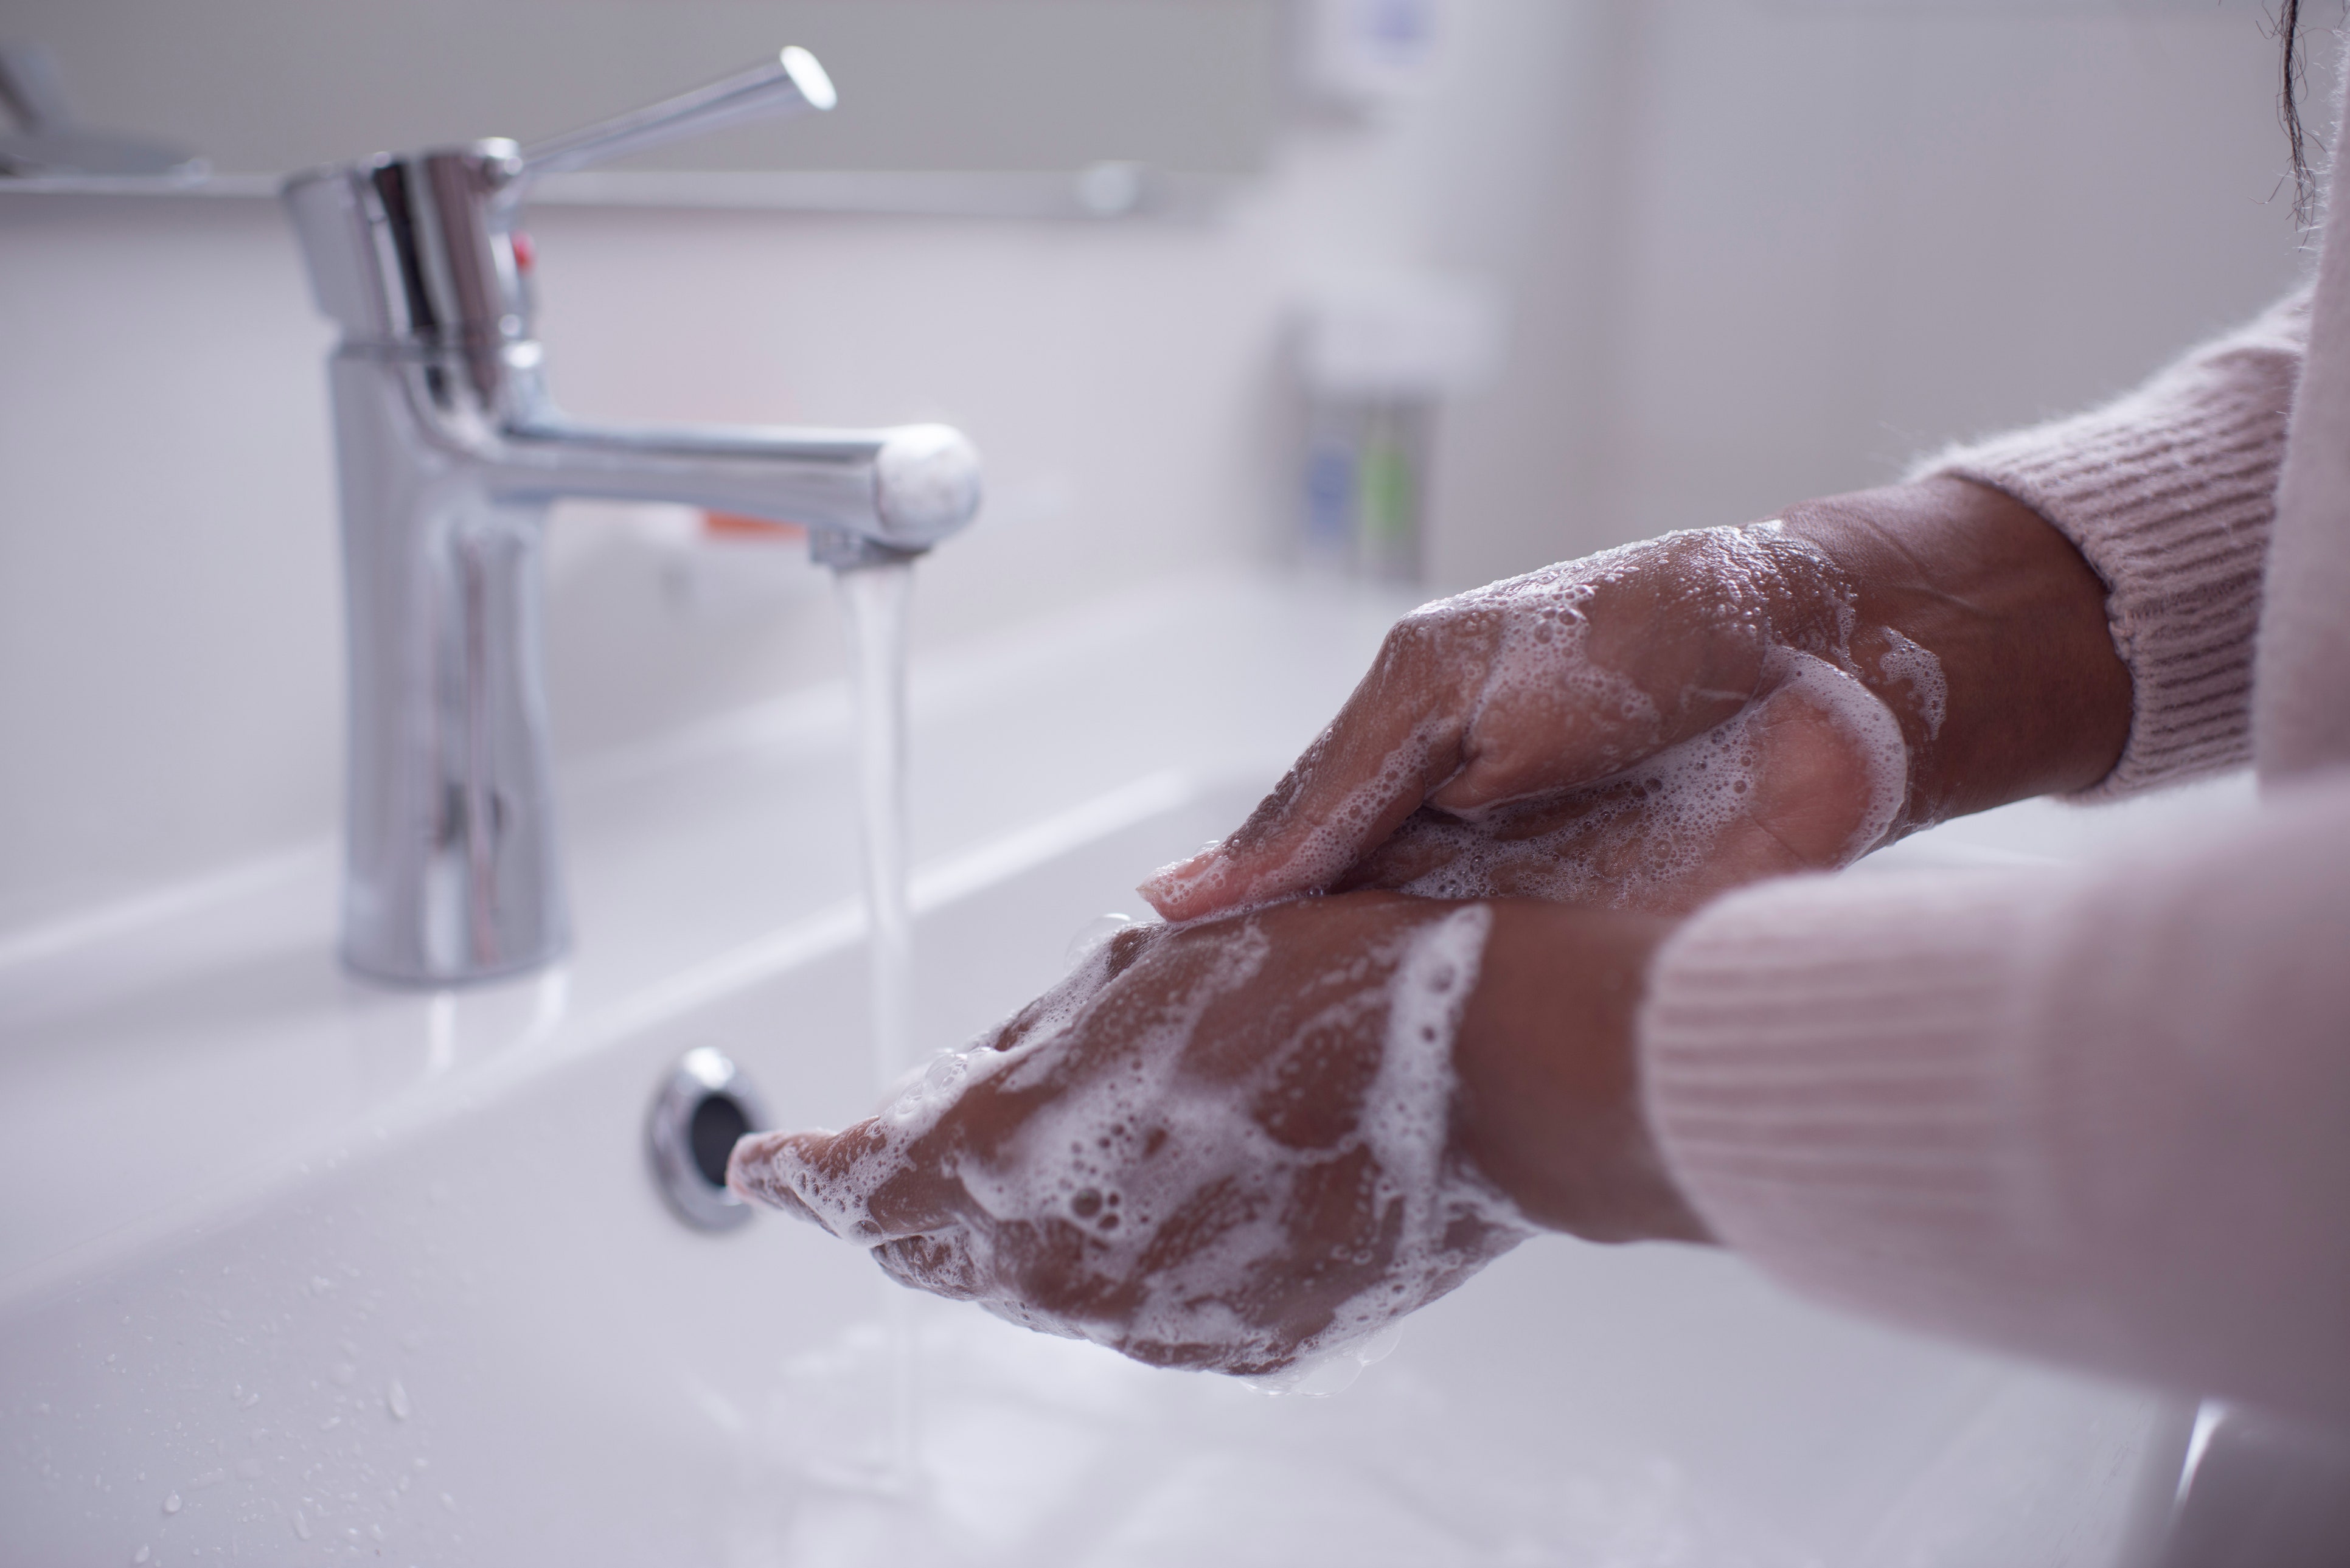 Popular hand soap that reminds of concern about bacterial infection